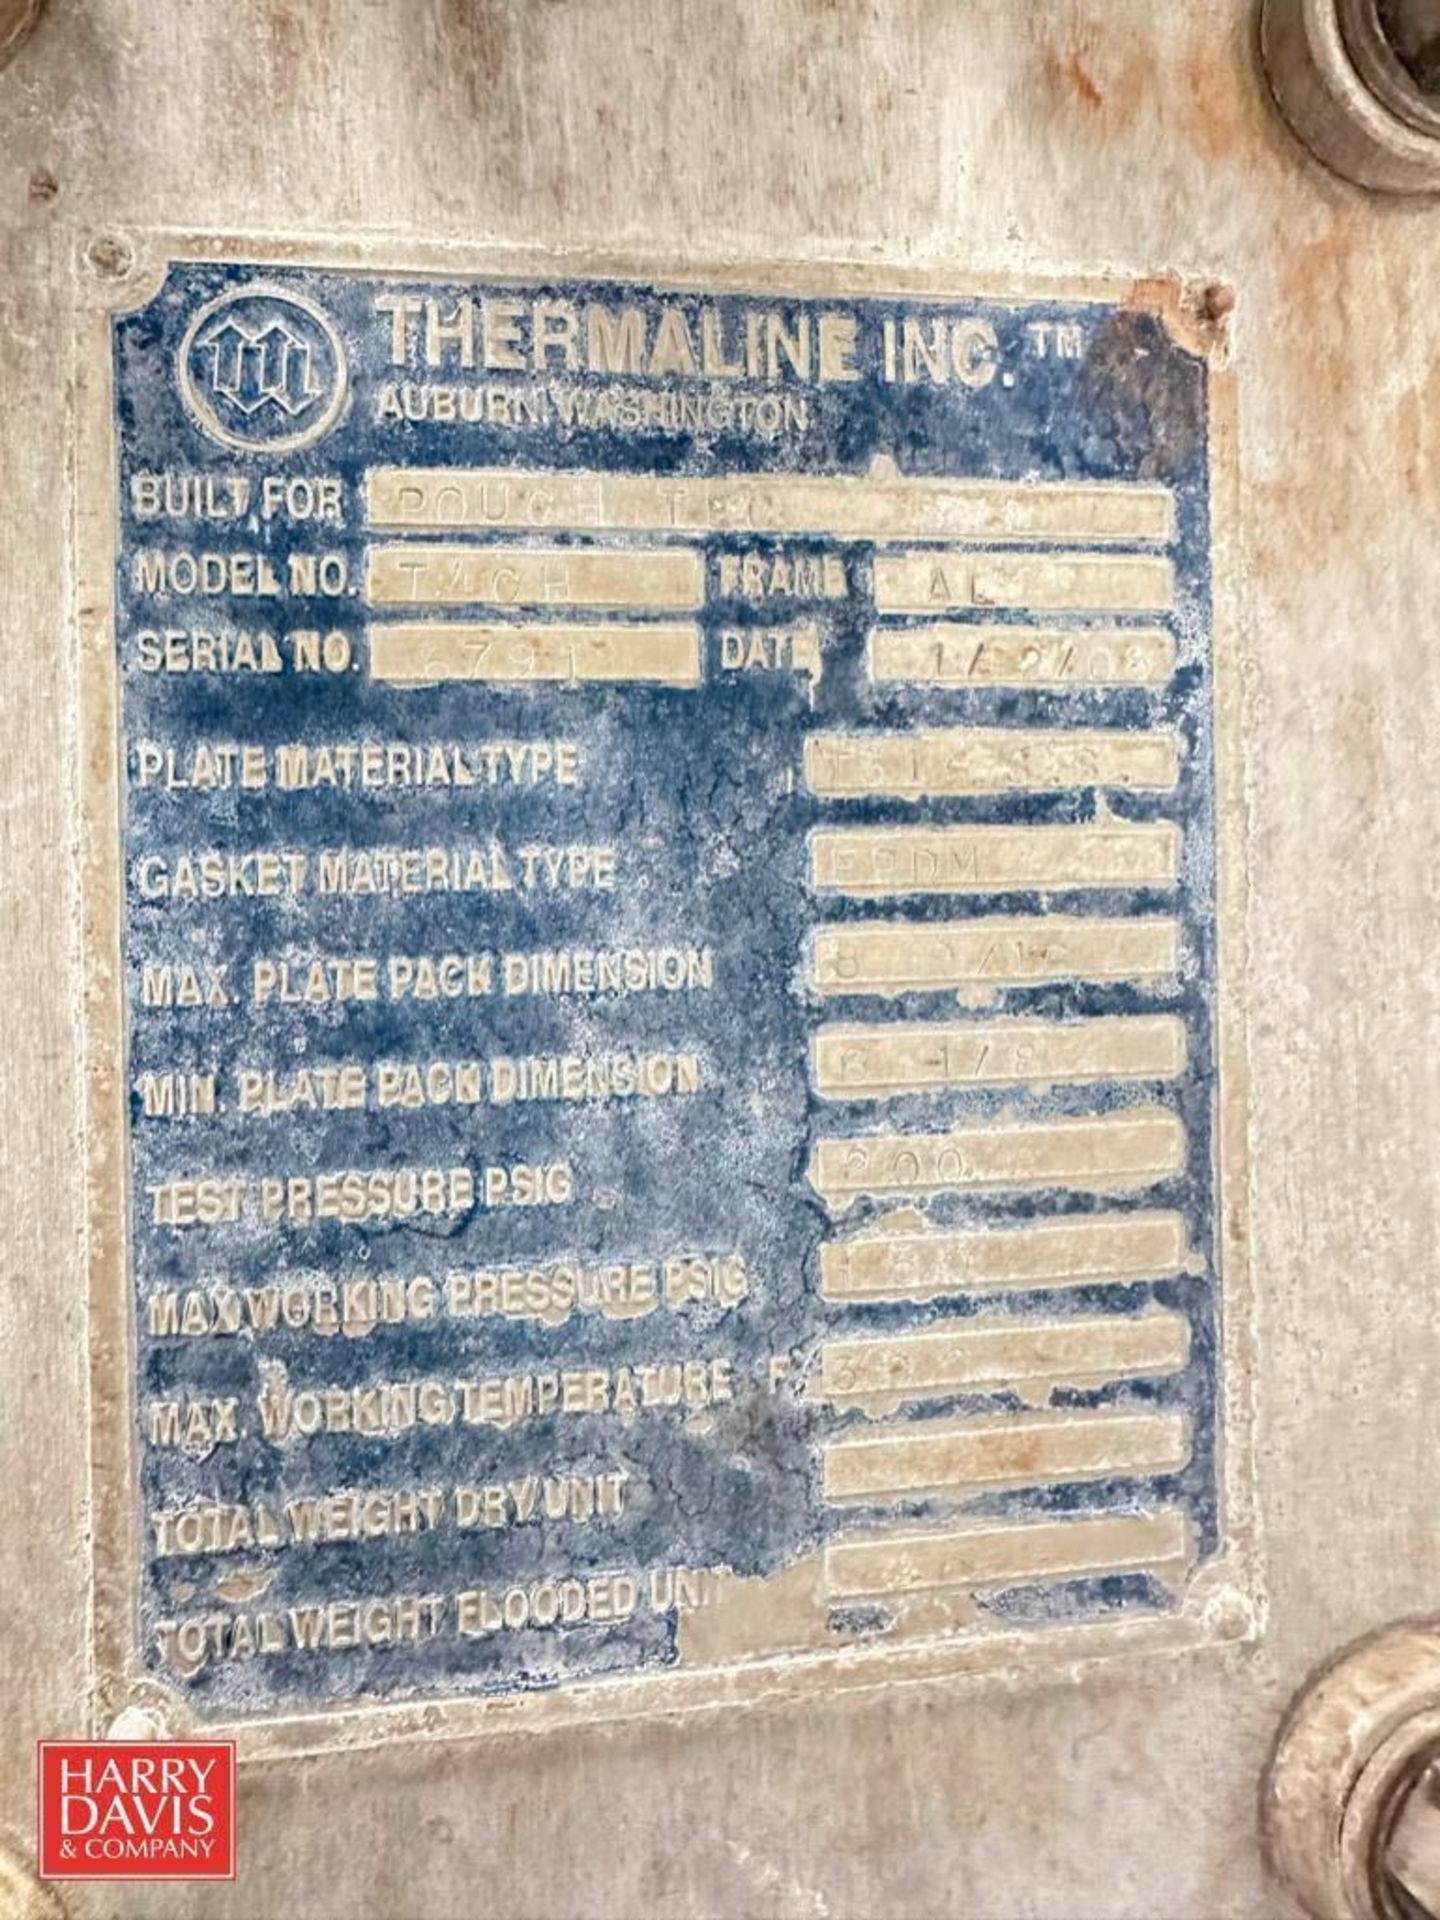 Thermaline S/S Plate Heat Exchanger, Model: T4CH, S/N: 6791 - Rigging Fee: $500 - Image 2 of 2